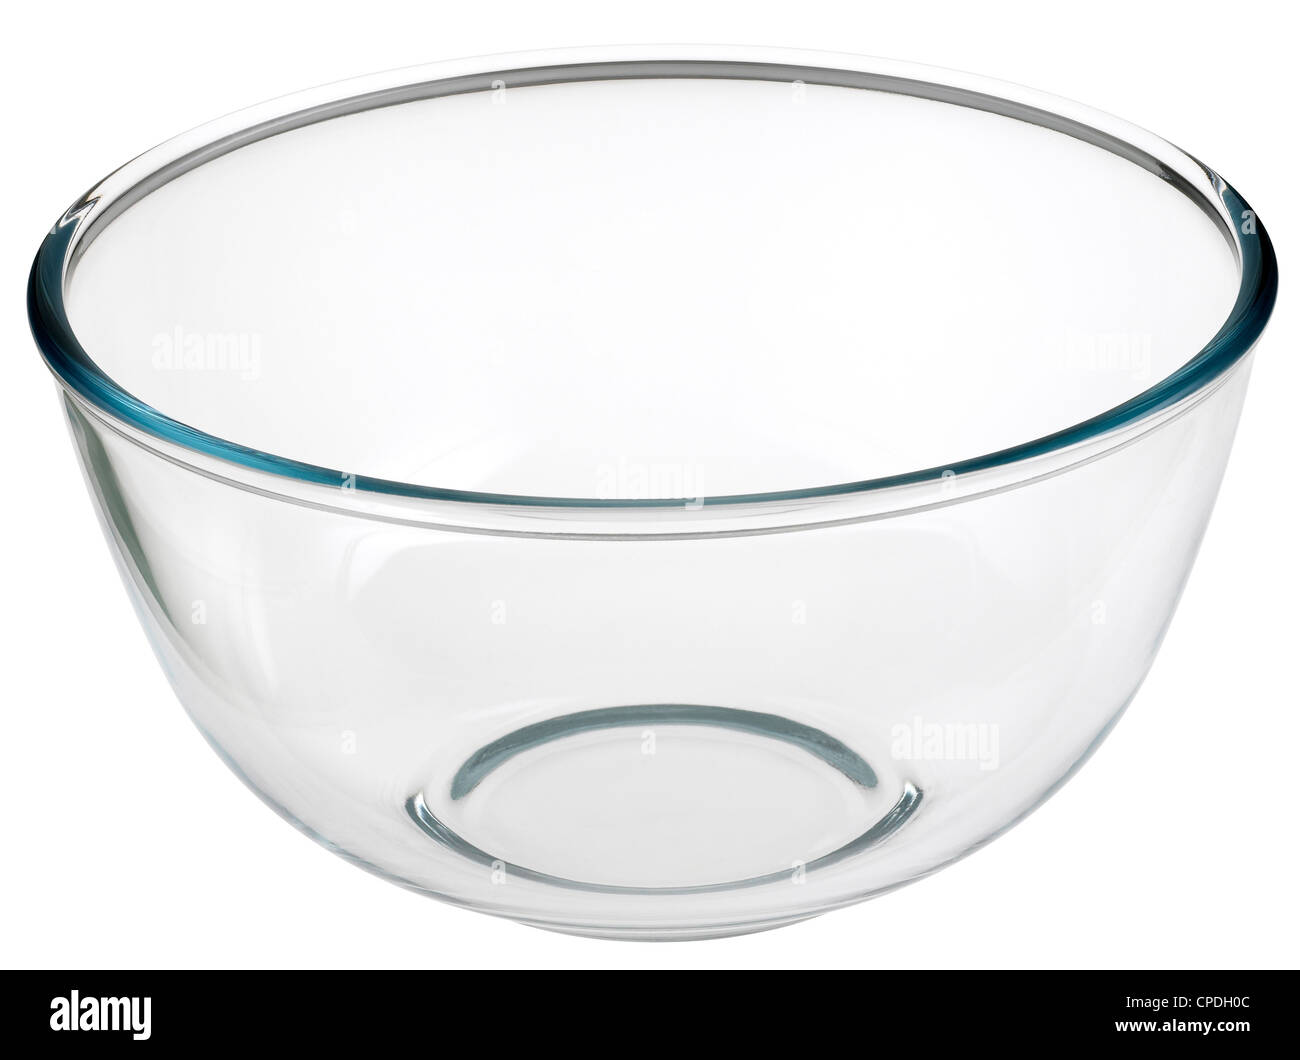 A glass bowl on white background. Stock Photo